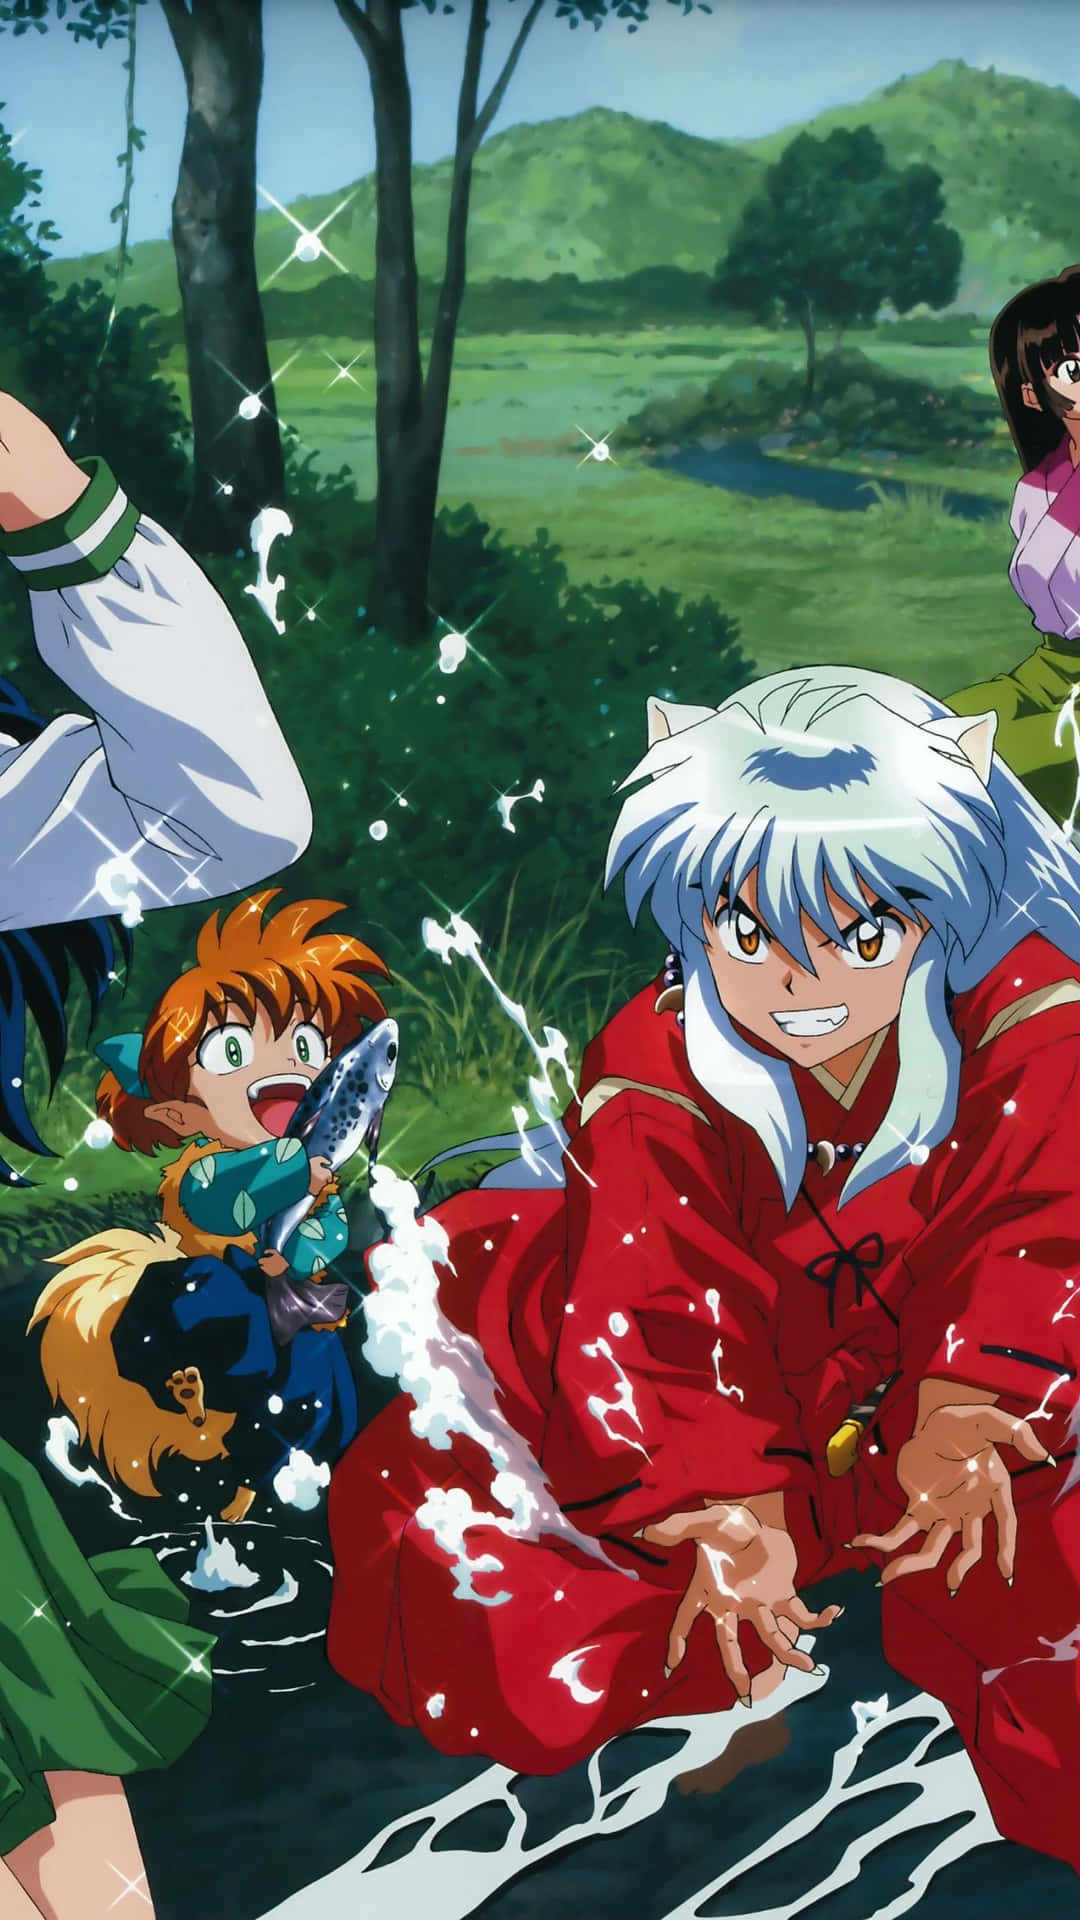 Get lost in the world of Inuyasha in this amazing 4K resolution wallpaper Wallpaper